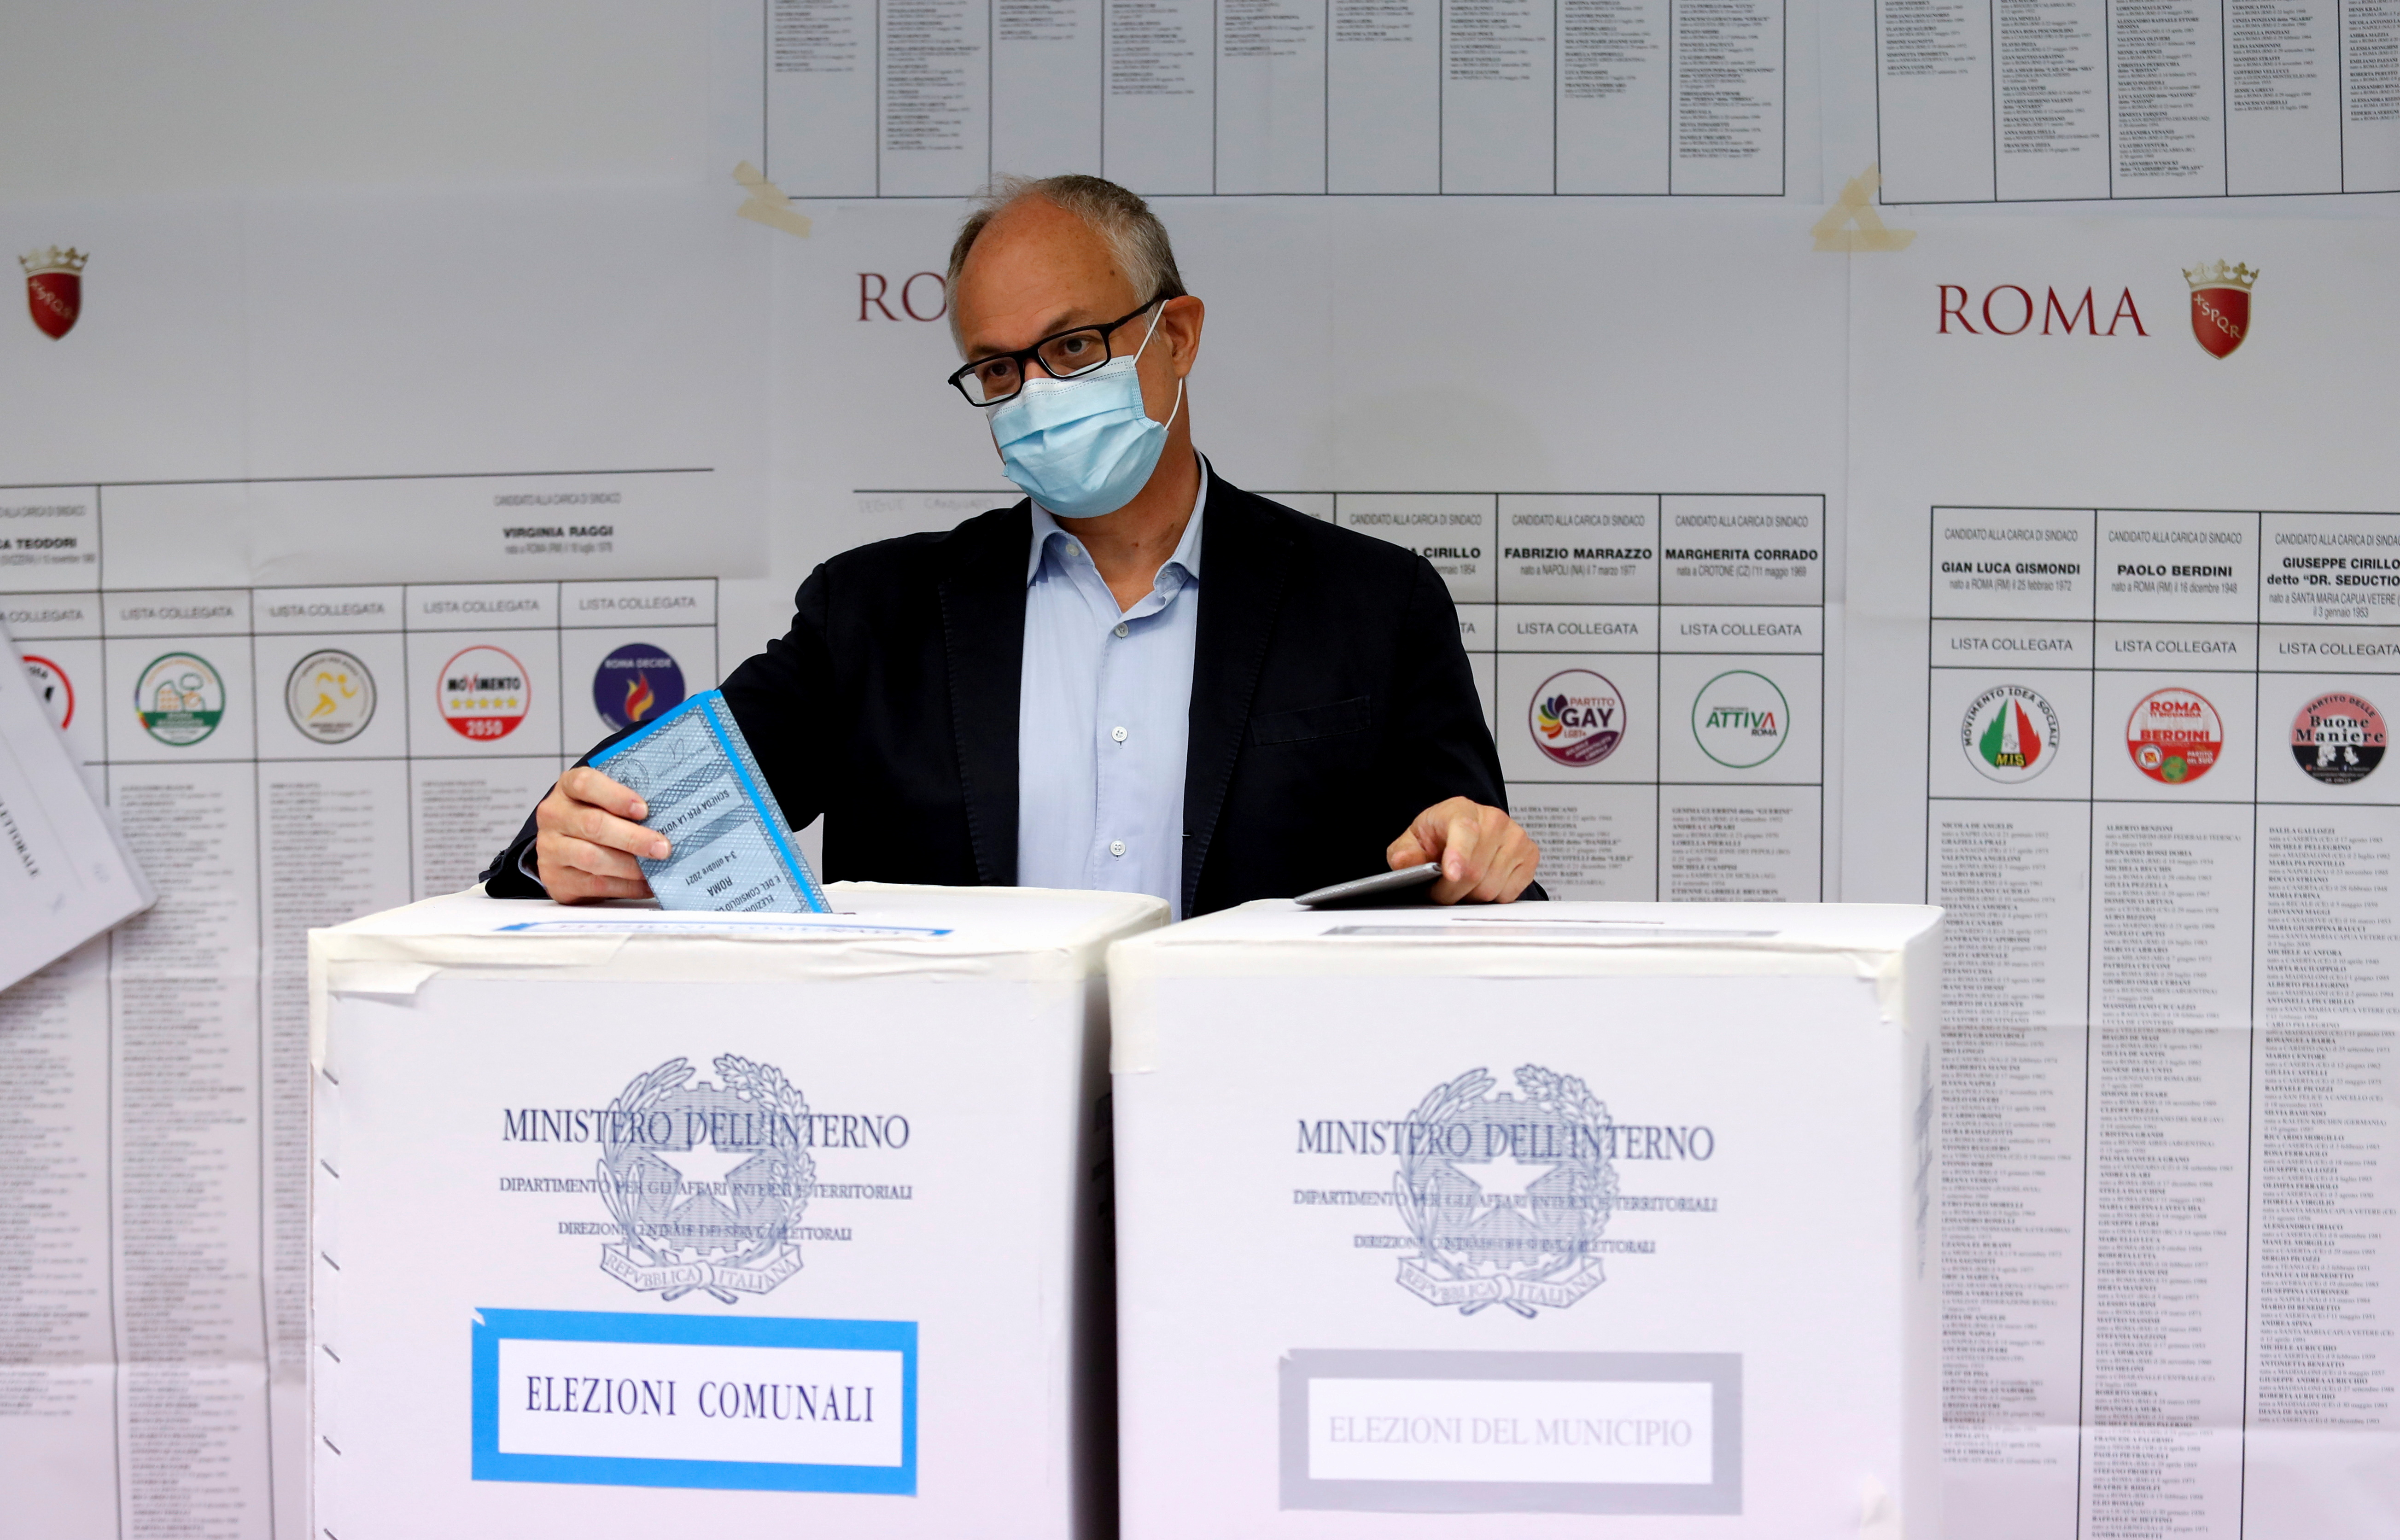 Italy holds elections for mayors and councillors